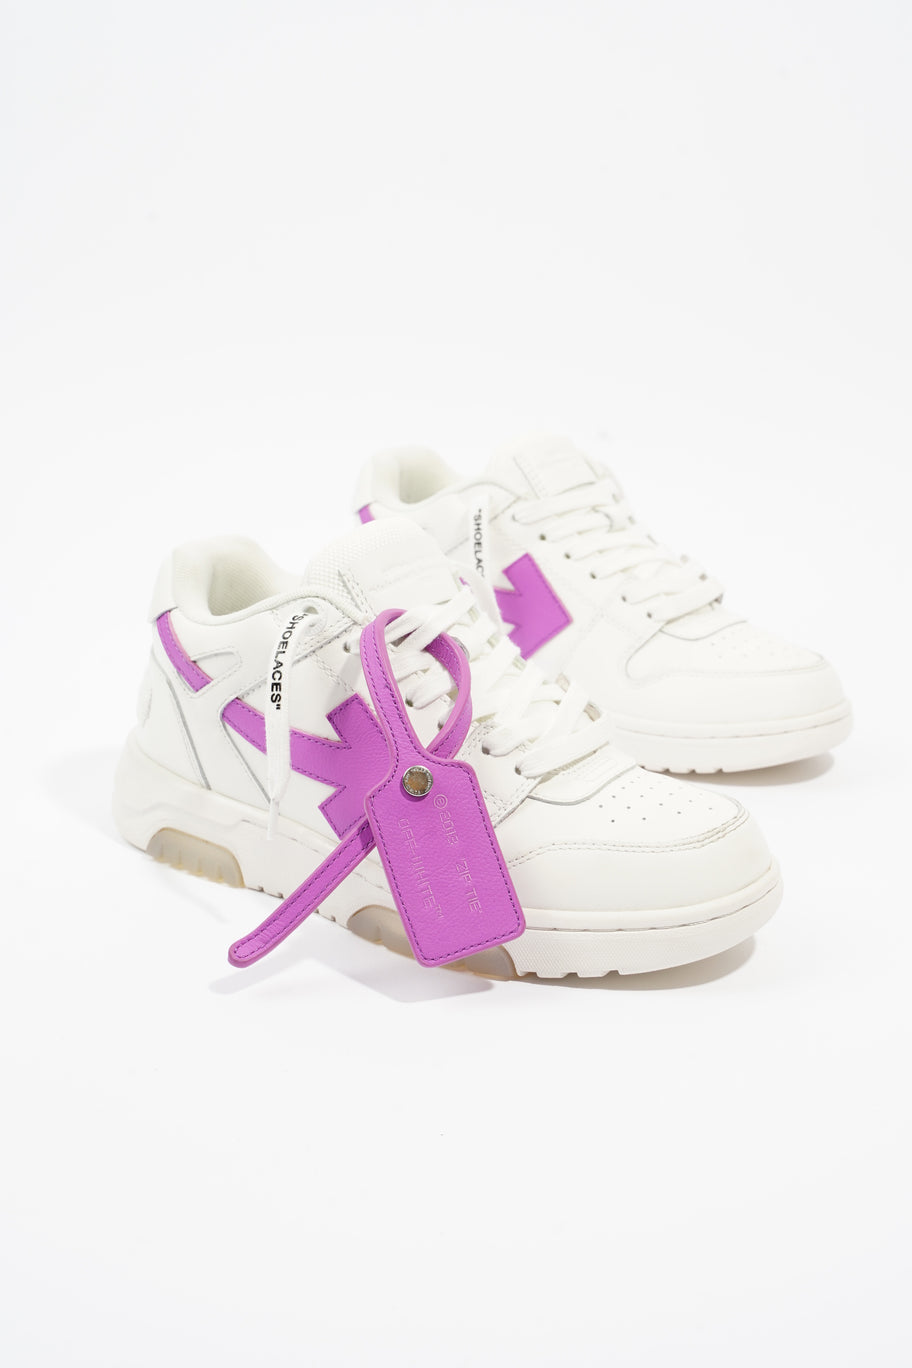 Out Of Office White / Pink Leather EU 37 UK 4 Image 2